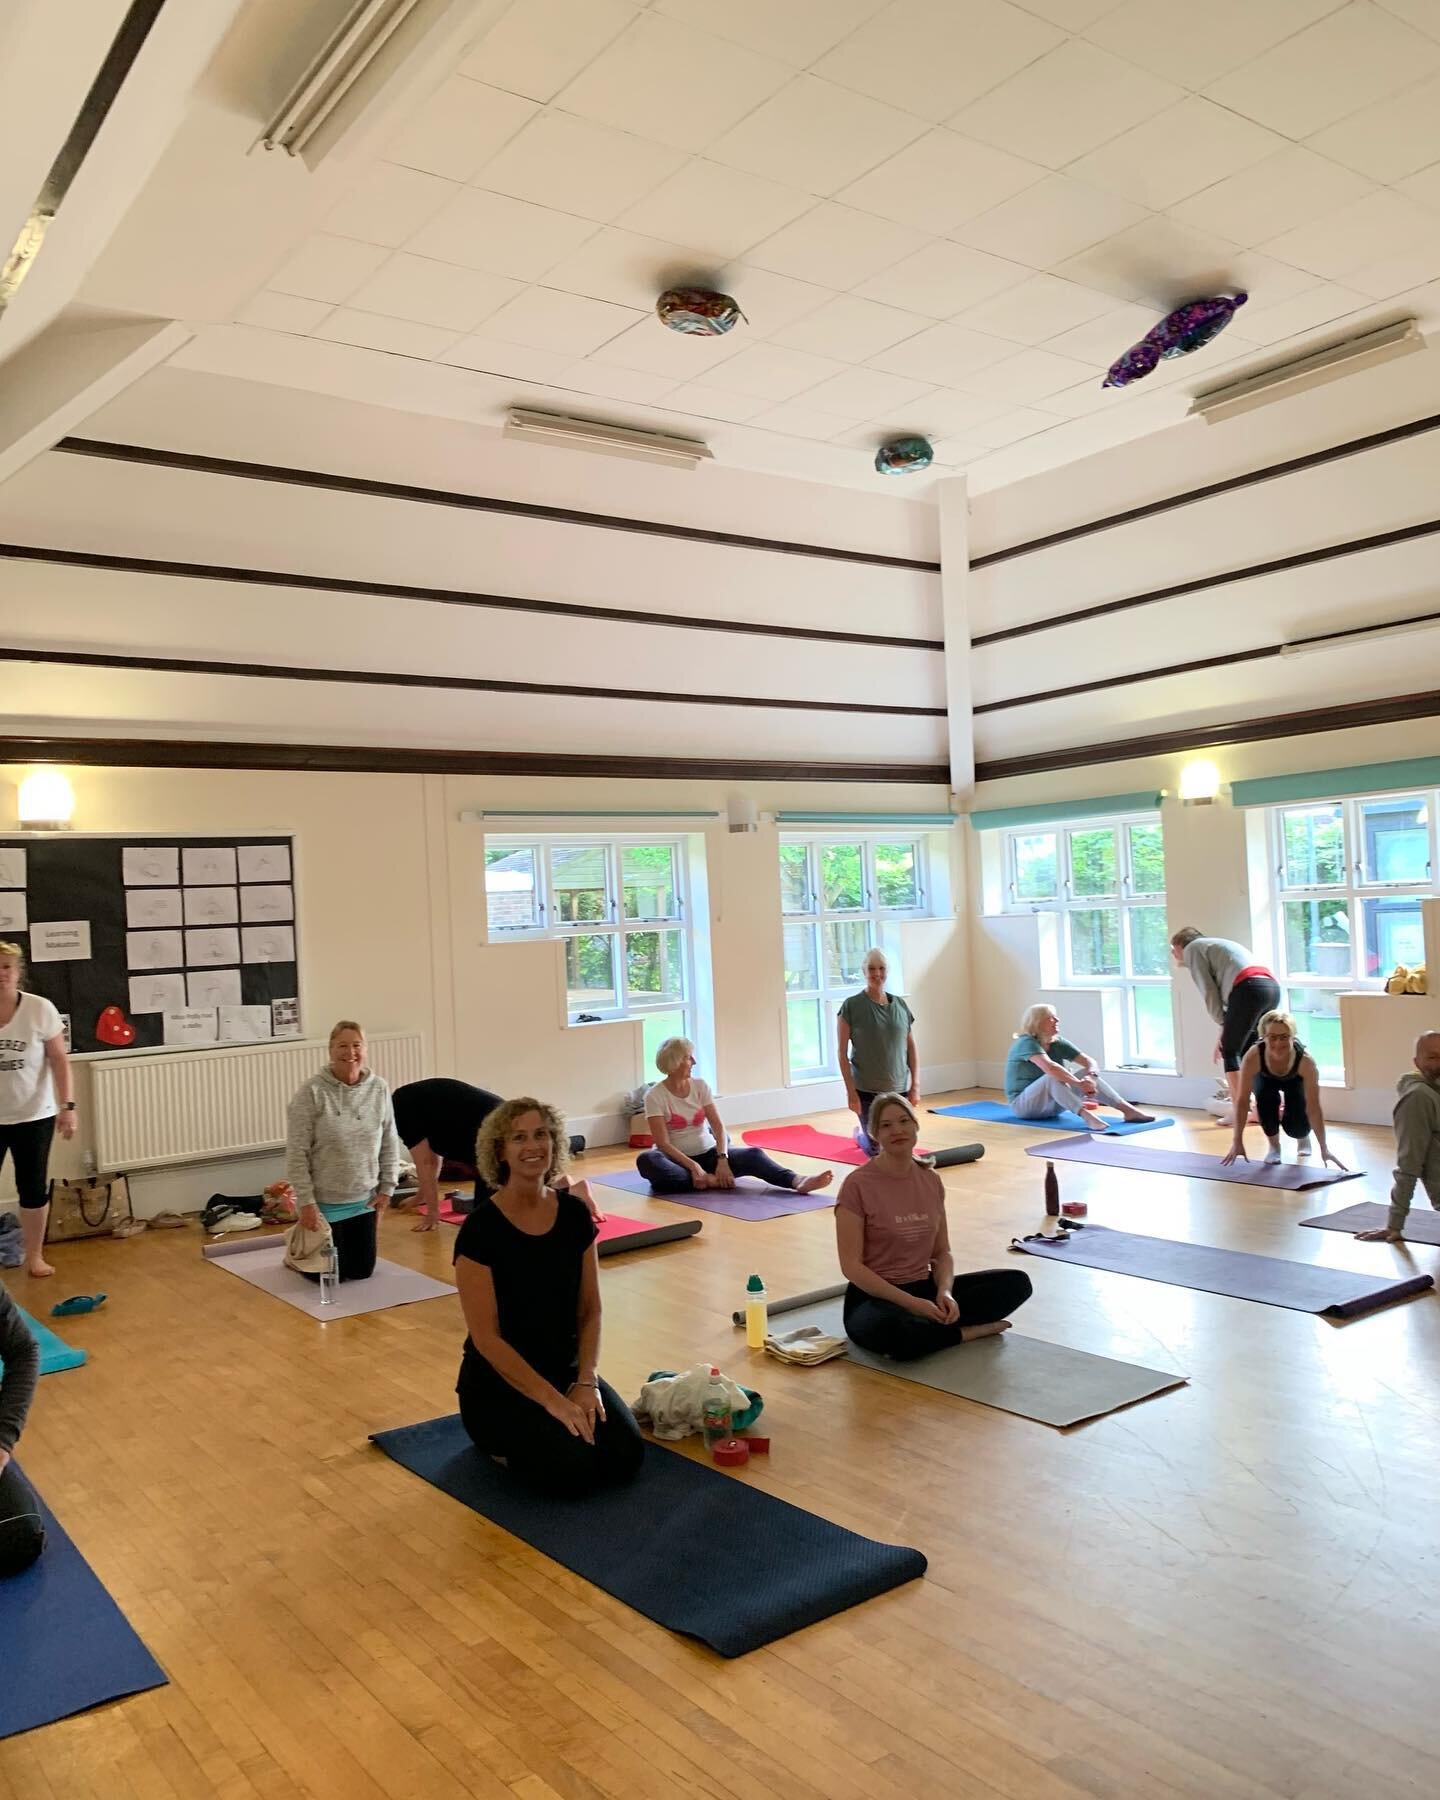 Last night&rsquo;s class beginning and end pics, with the in between focusing on Natarajasana and the 4th chakra.

Our Tuesday evening Colden Common class has now been running for exactly one year ✨
And what a fabulous bunch of Yoginis and Yogis they